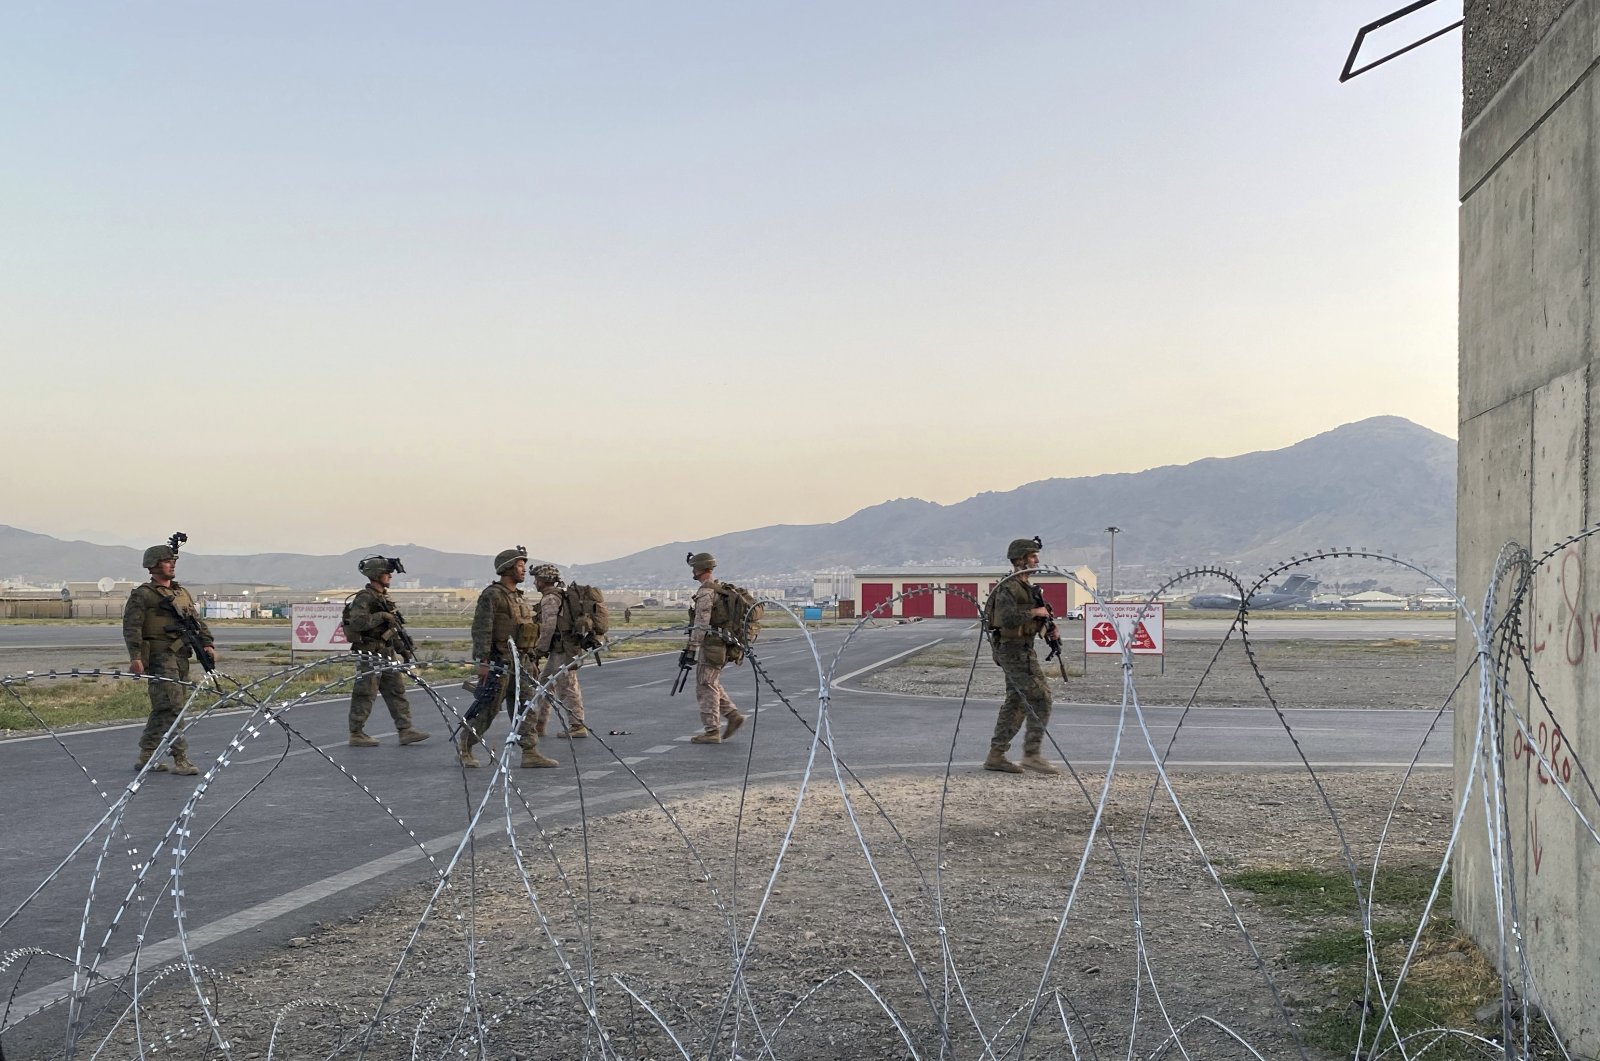 U.S. soldiers stand guard along a perimeter at the international airport in Kabul, Afghanistan, Aug. 16, 2021. (AP Photo)